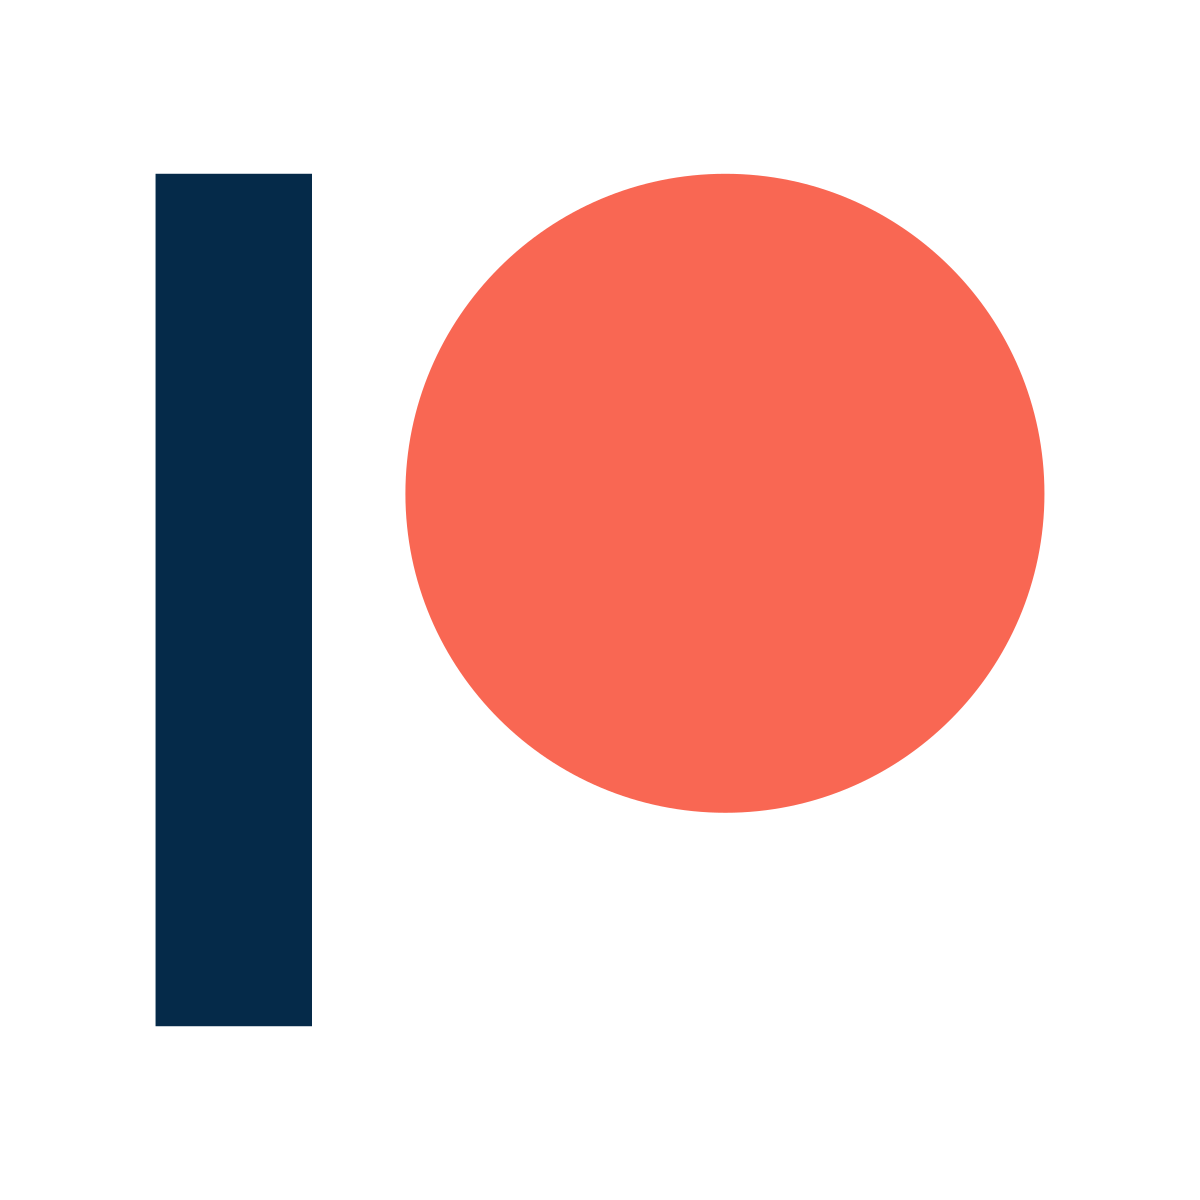 The Patreon logo; a dark blue stick with an orange circle meant to represent the letter P.